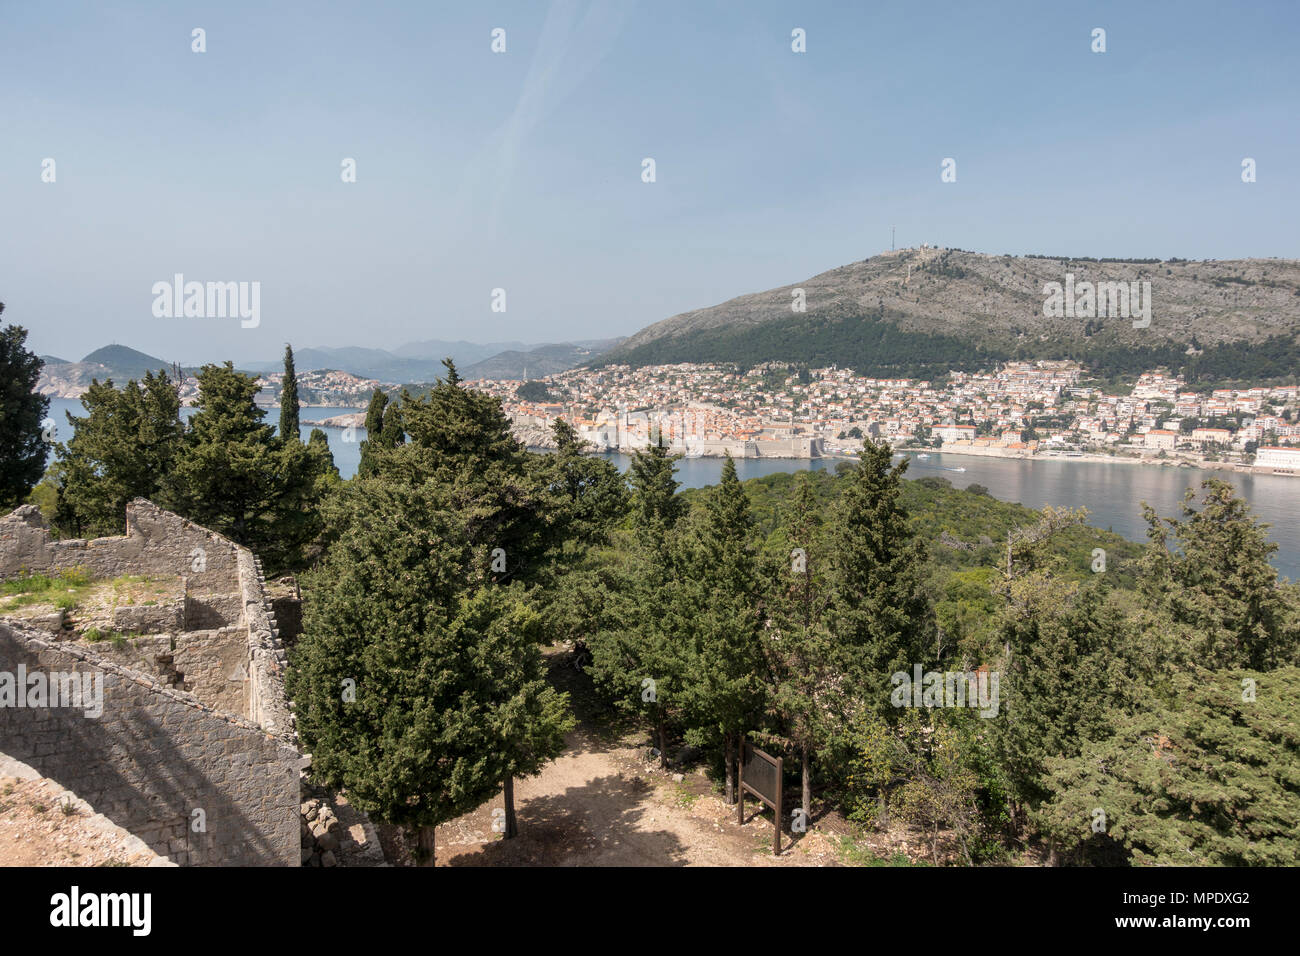 View looking from Fort Royal on Lokrum Island towards the Old City of Dubrovnik, Croatia. Stock Photo